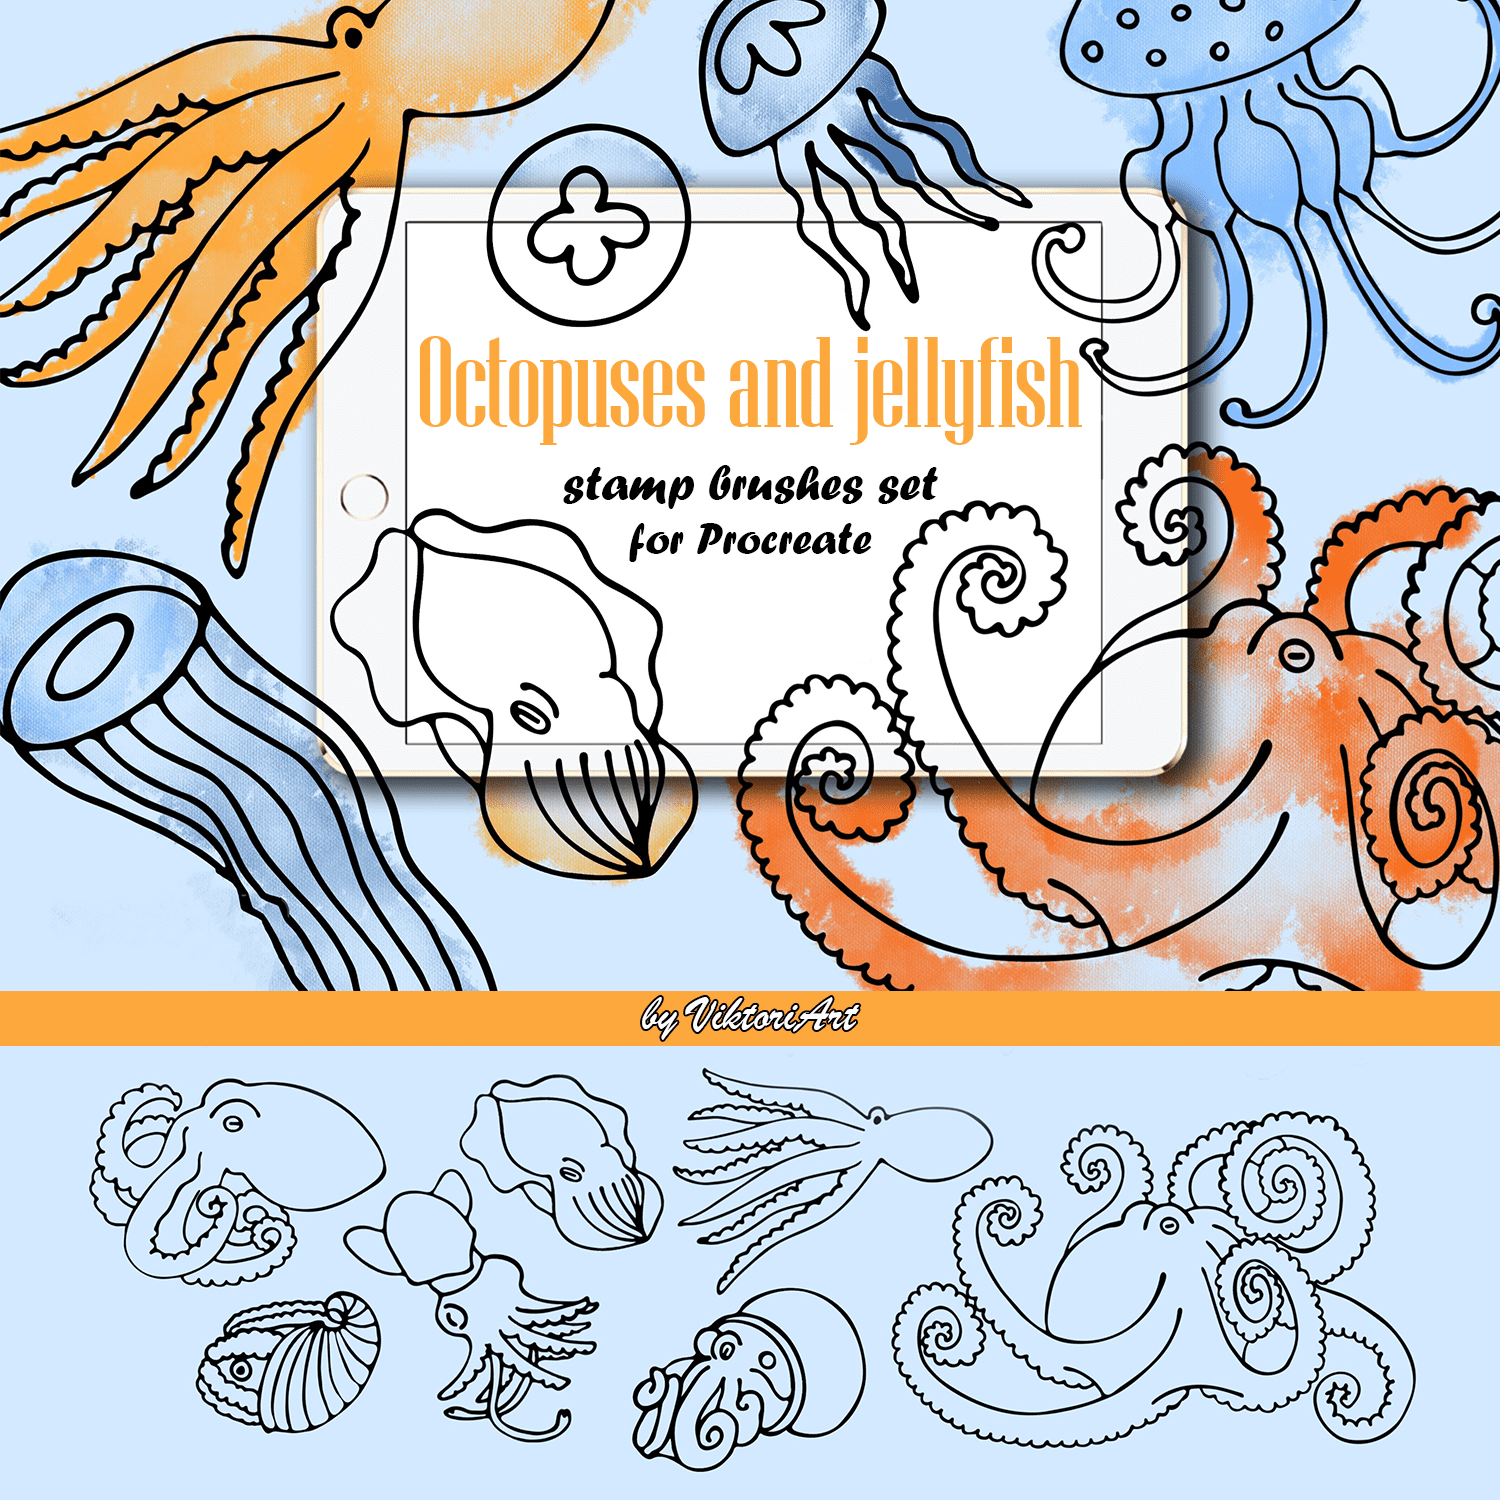 Octopuses and jellyfish - stamp brushes set for Procreate cover.